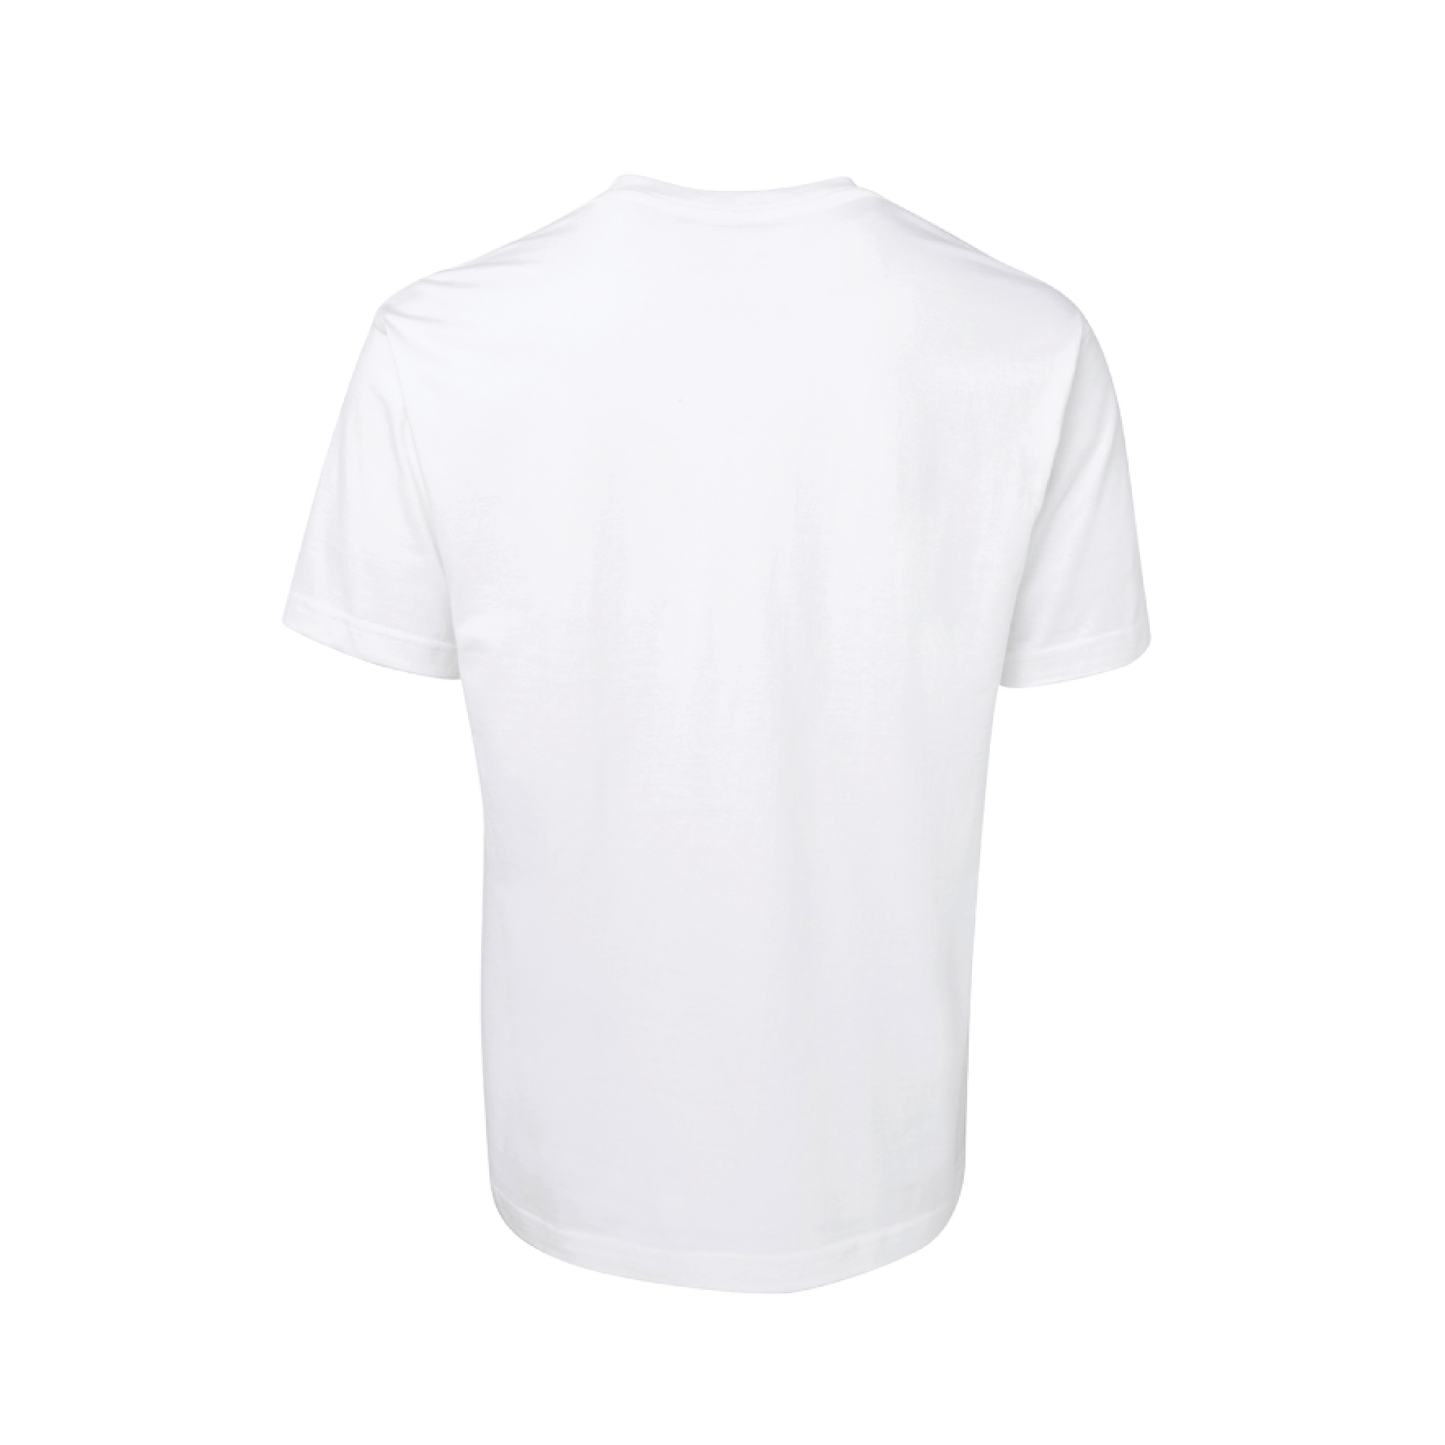 EASTER CLASSIC T-SHIRT WHITE SHORT SLEEVE (available online only)